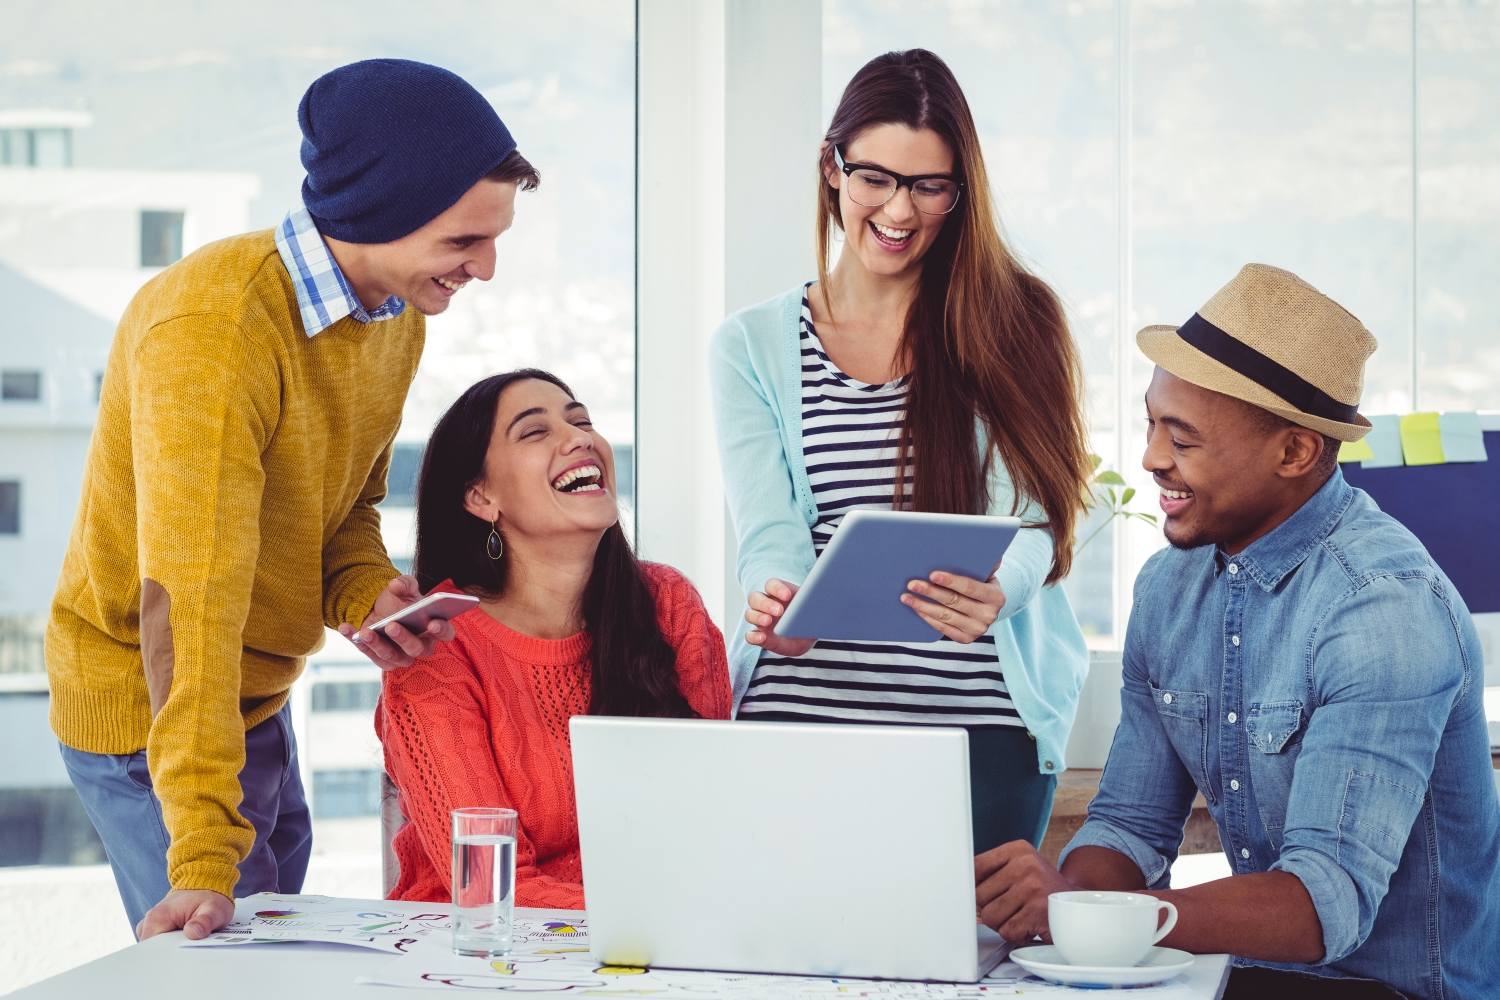 Millennials in Workplace Value Innovation, Authenticity, and Relaxed Culture